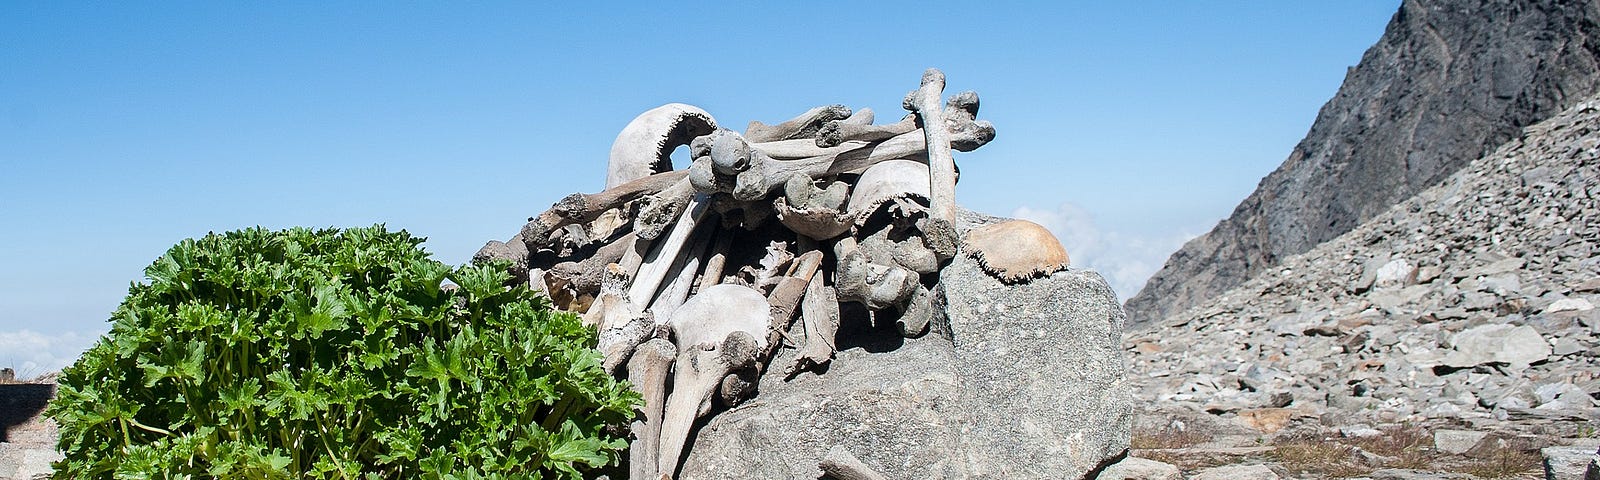 At Roopkund, or Skeleton Lake, rests the bones of hundreds of ancient humans